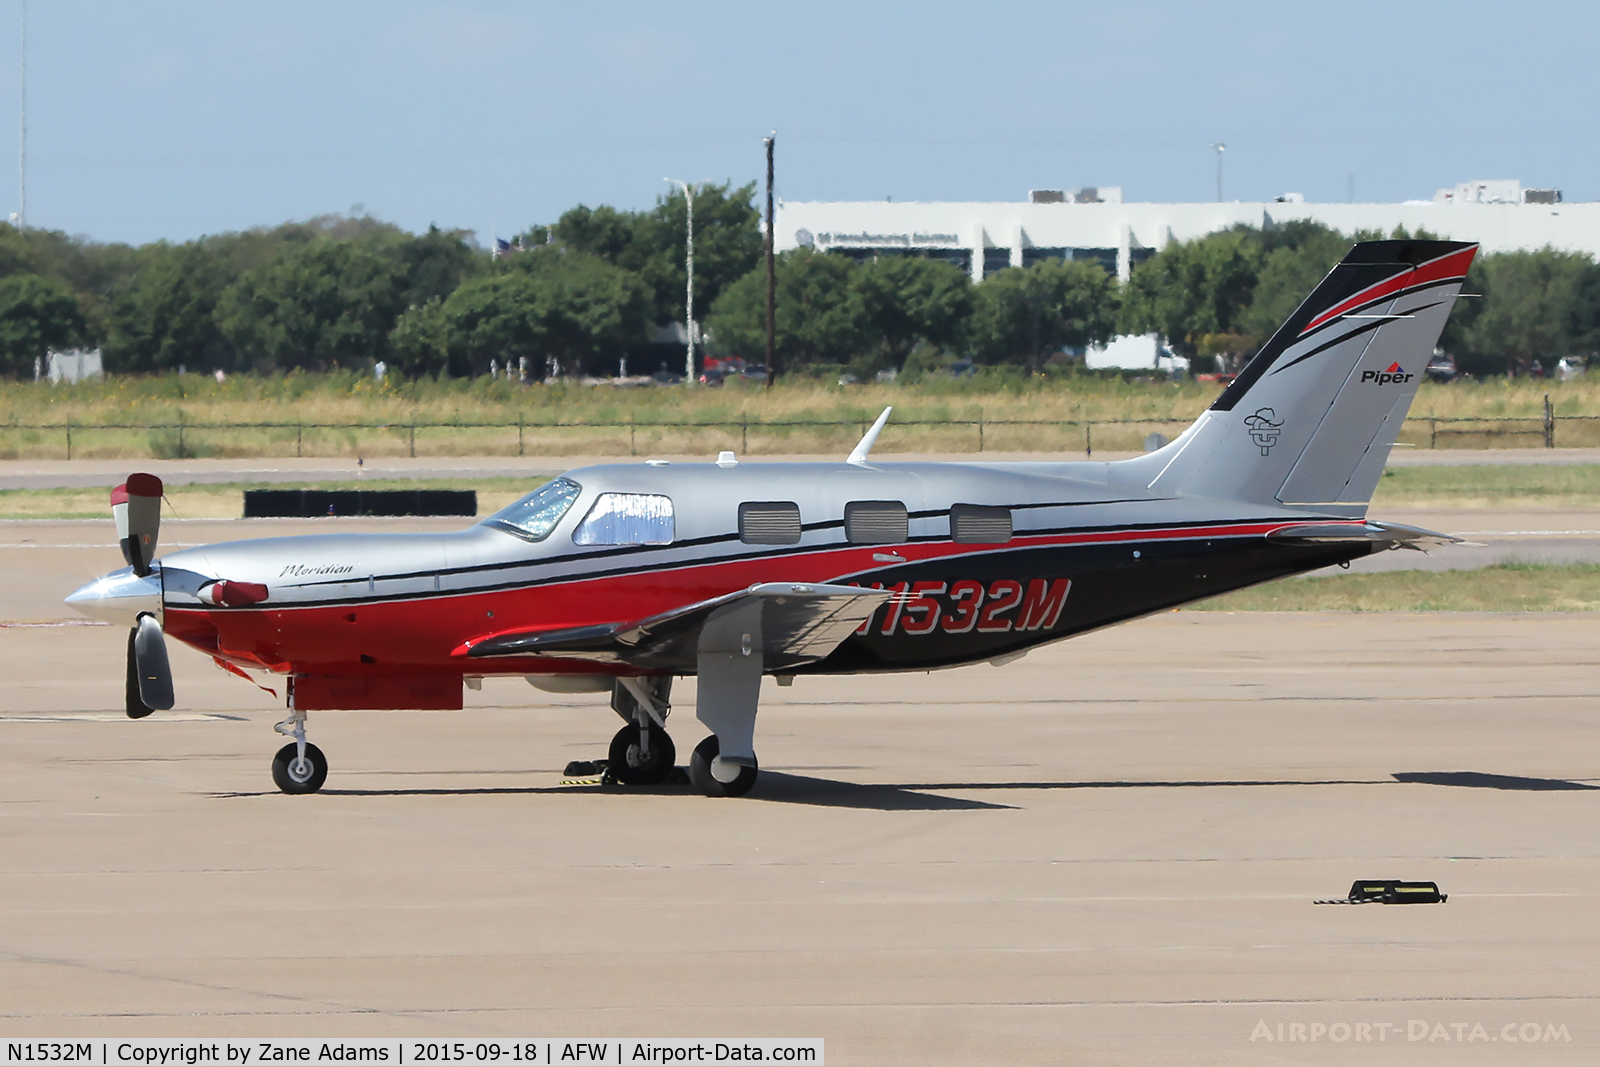 N1532M, 2012 Piper PA-46-500TP C/N 4697503, At Alliance Airport - Fort Worth, TX